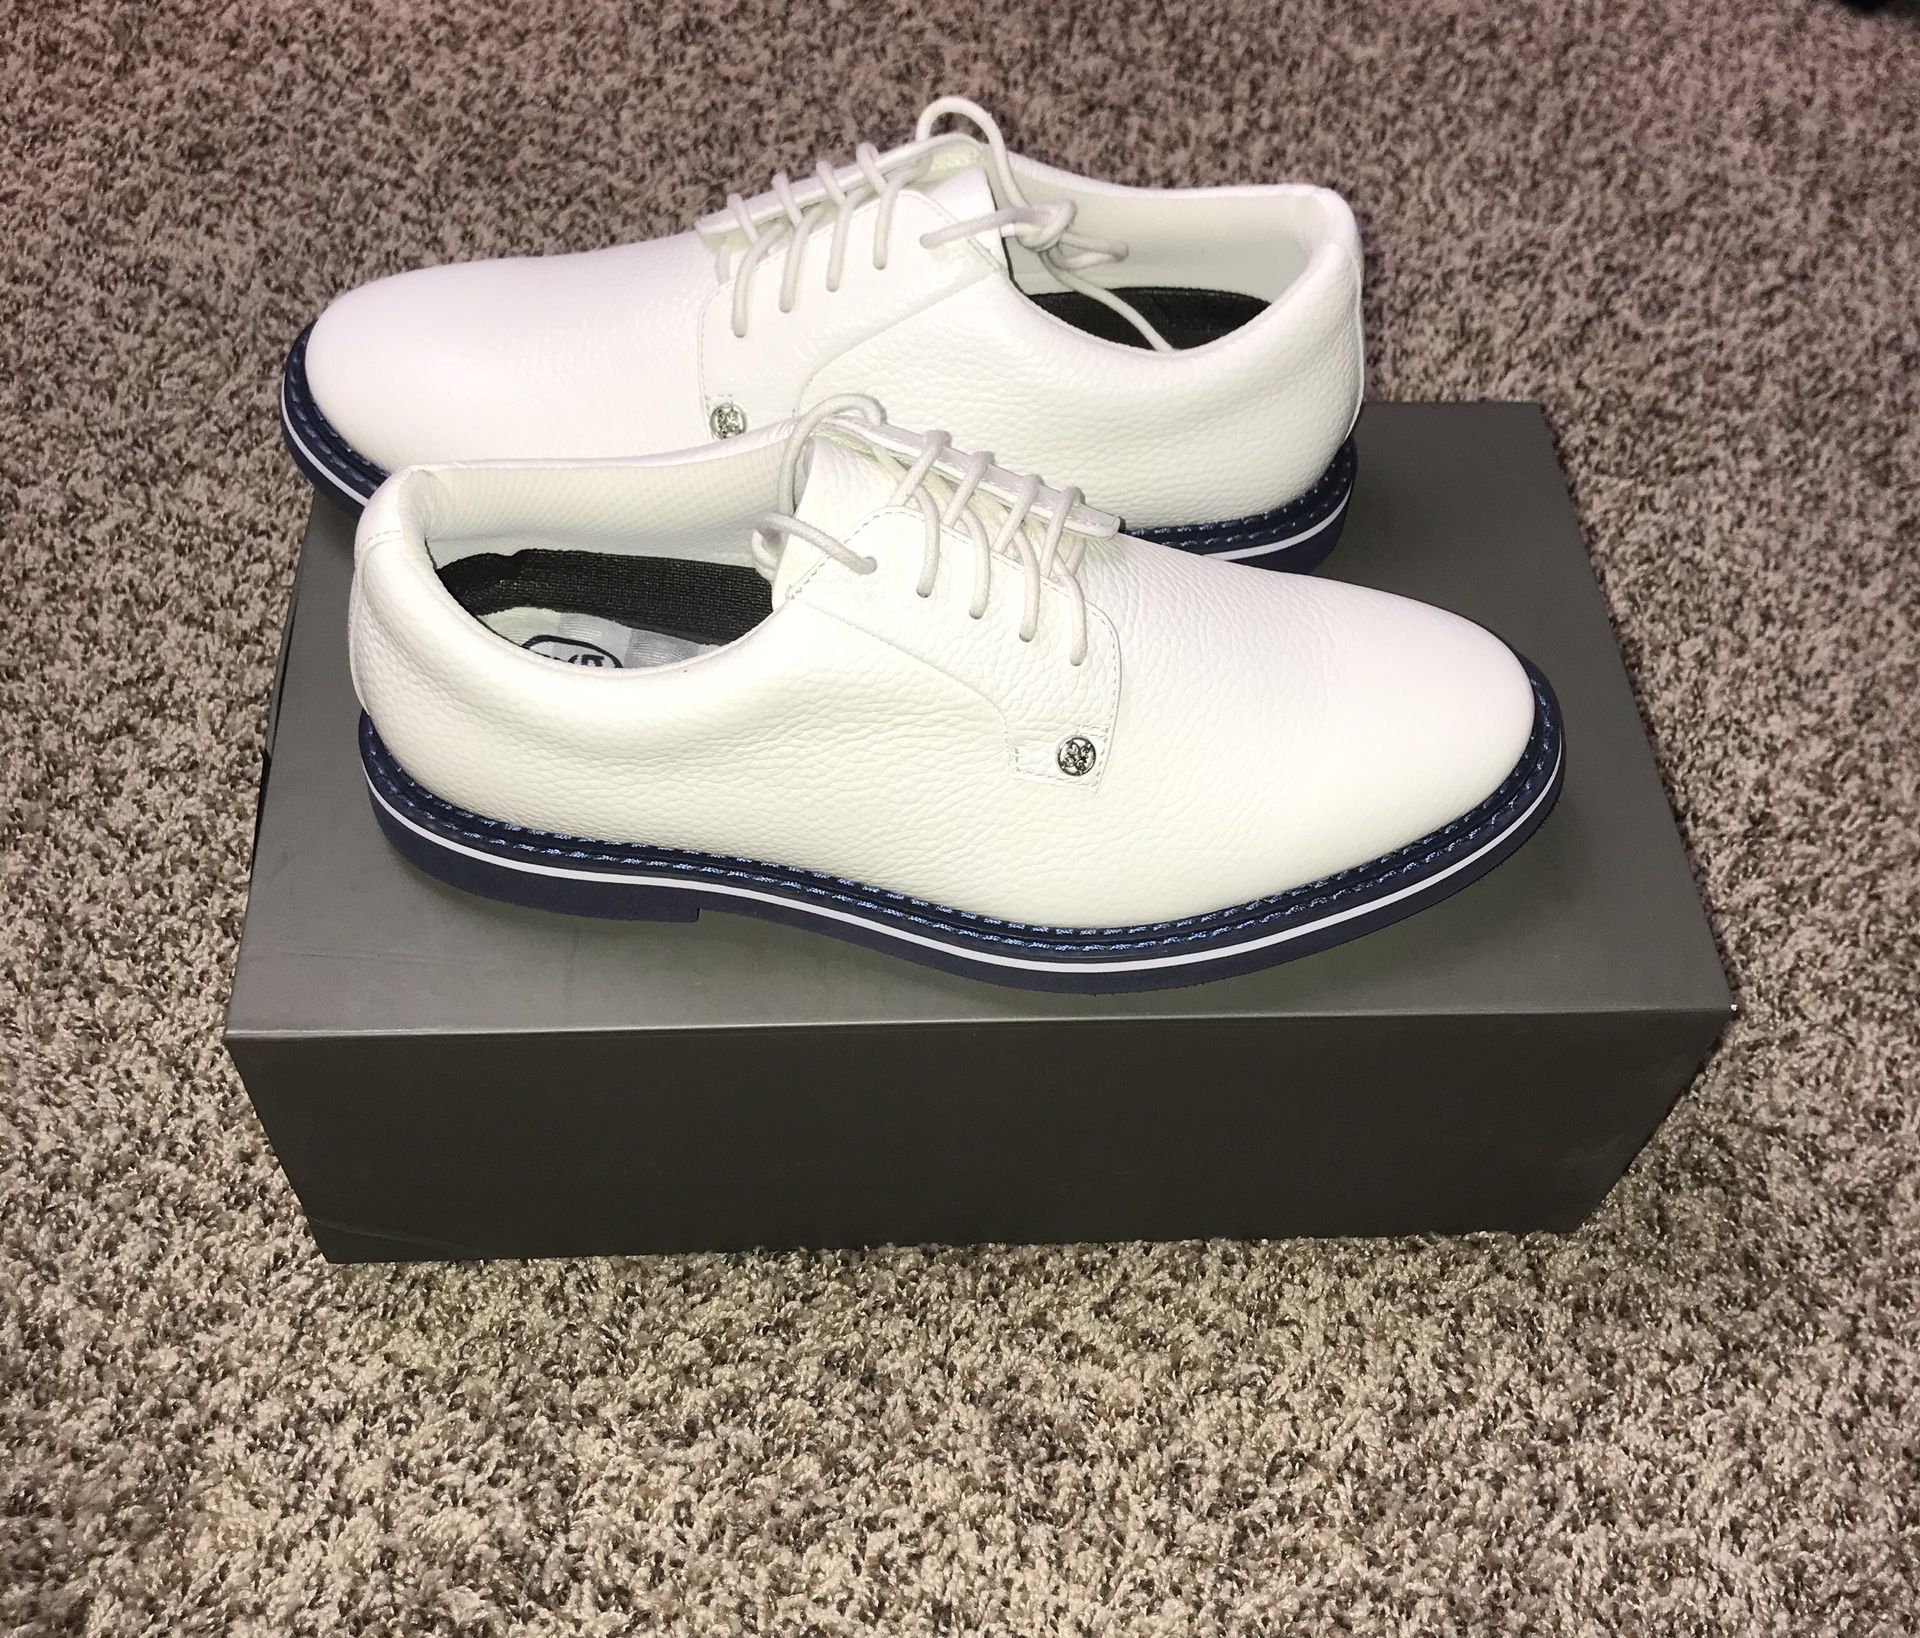 G/Fore Gallivanter Clover Golf Shoe Size 9 Men’s G4MF18EF01 White Blue Masters New with box